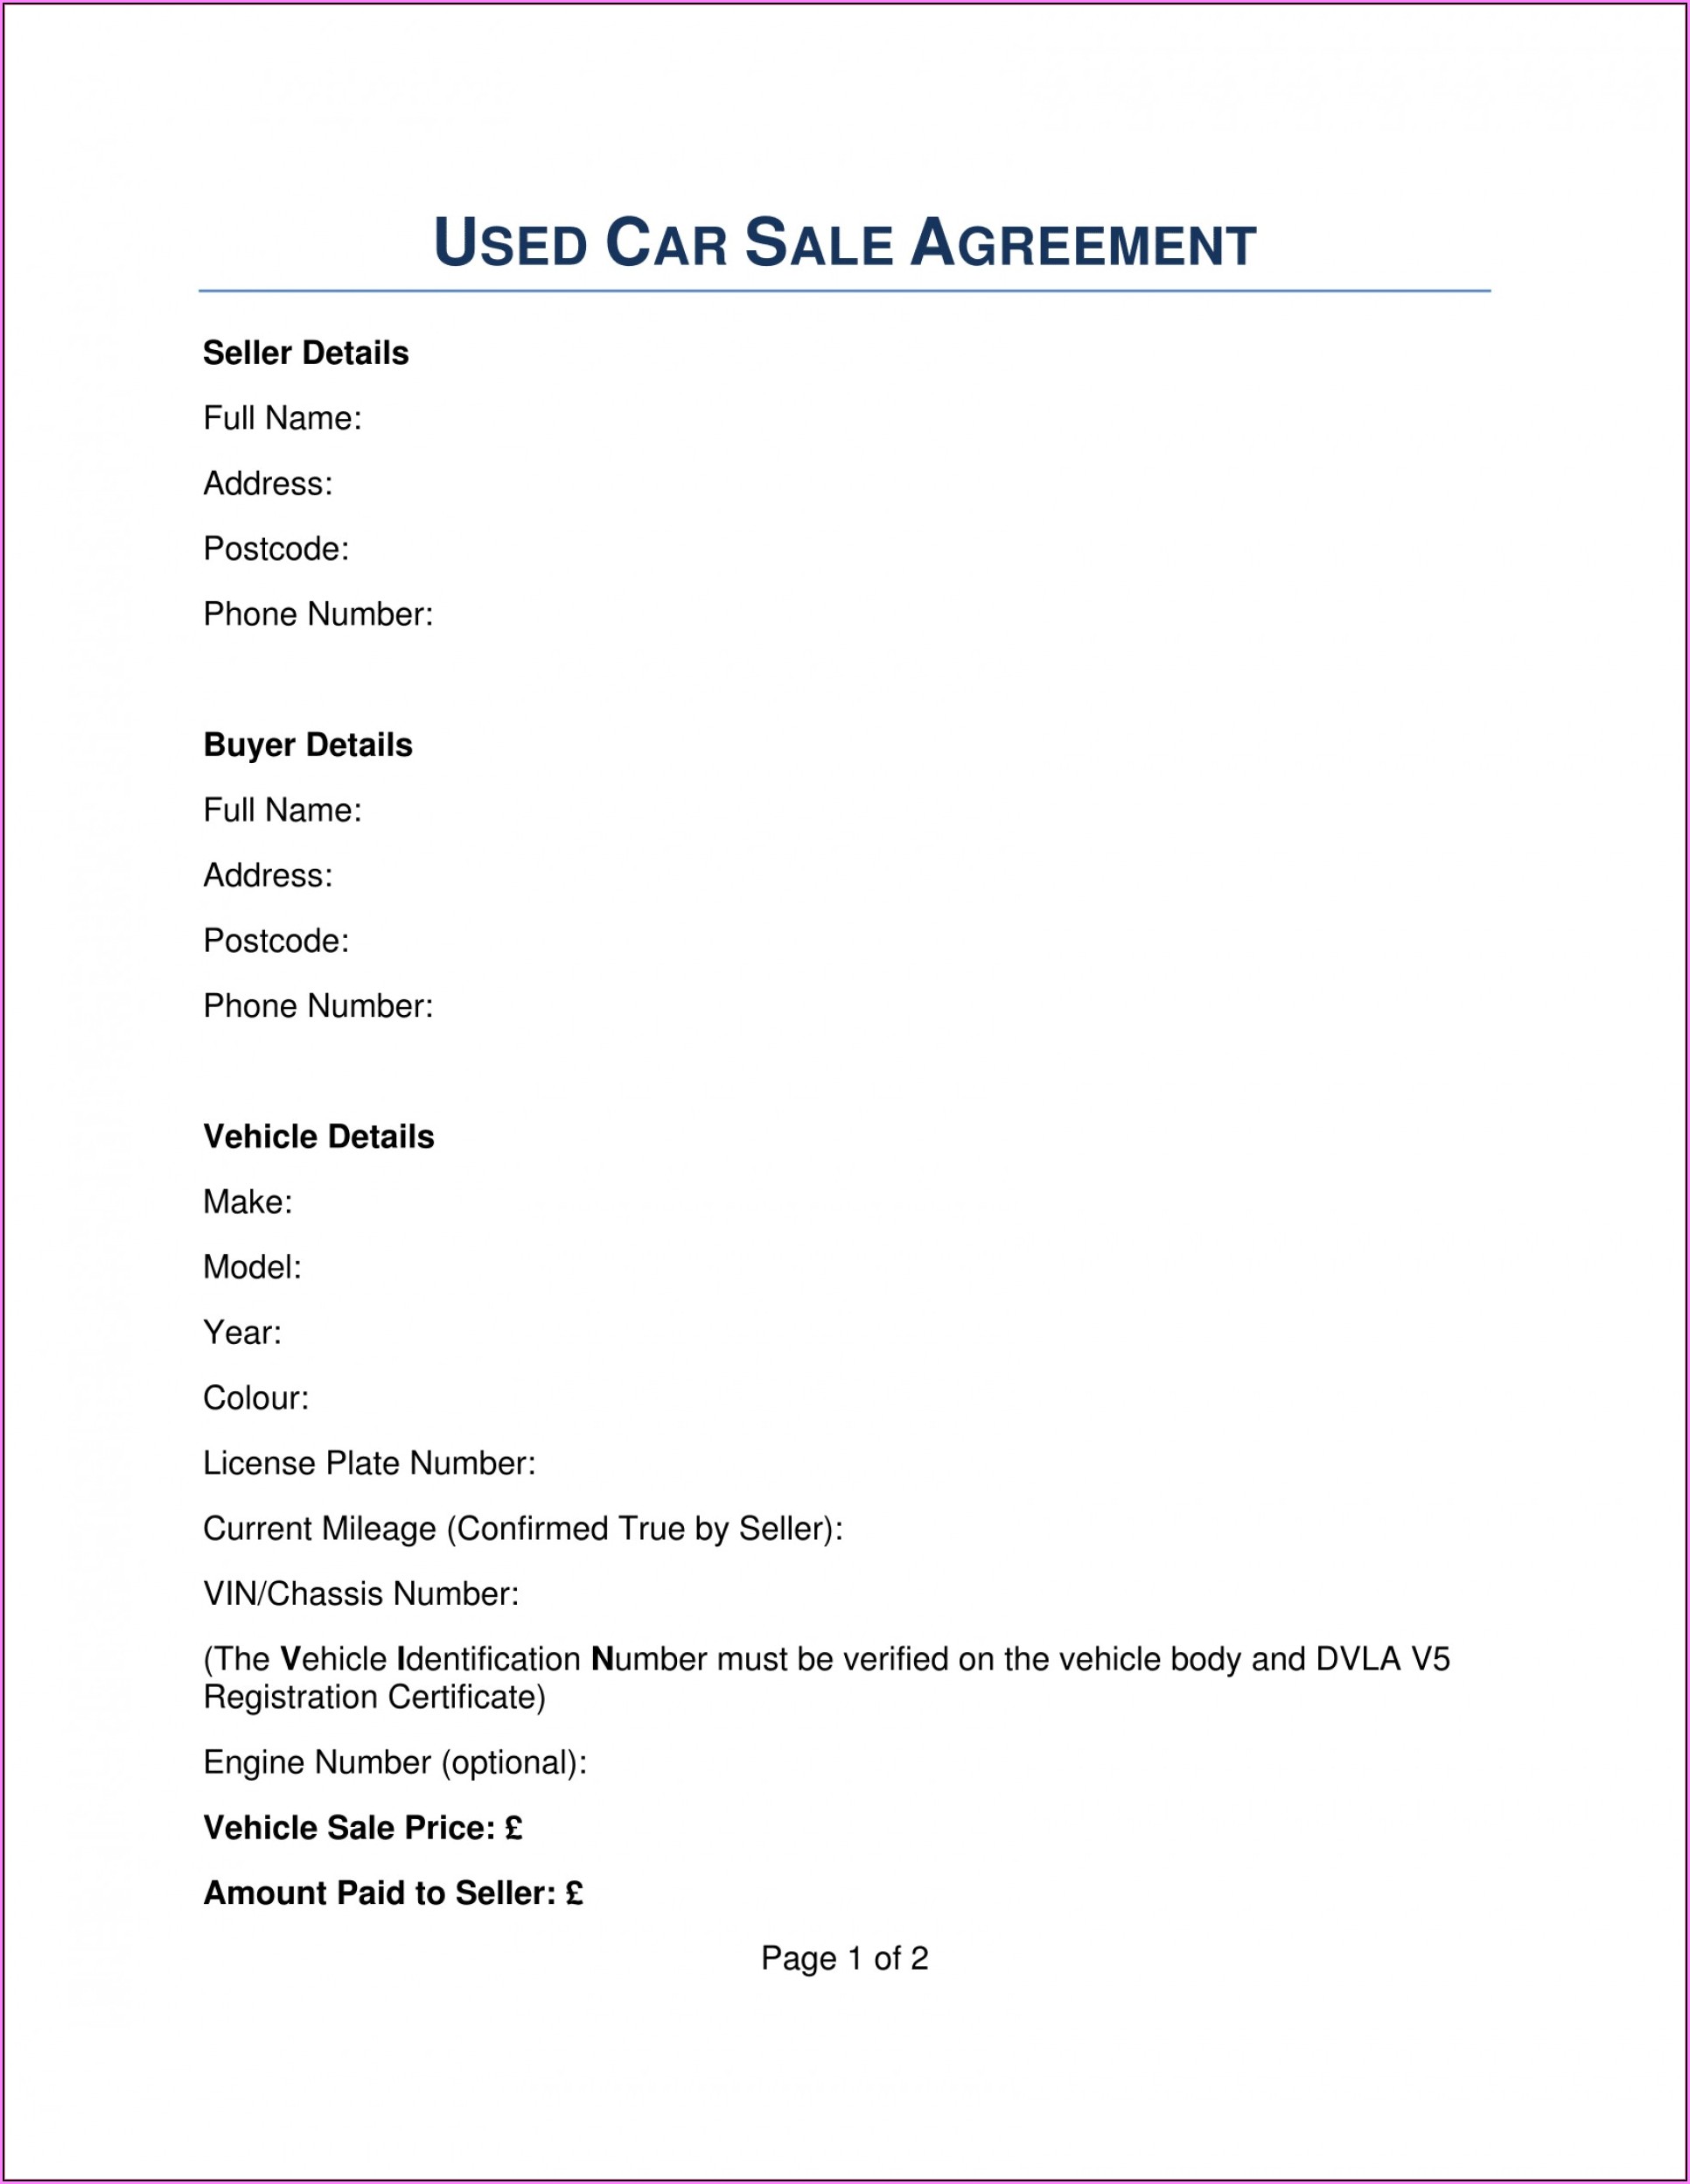 Free Sales Commission Agreement Template Uk